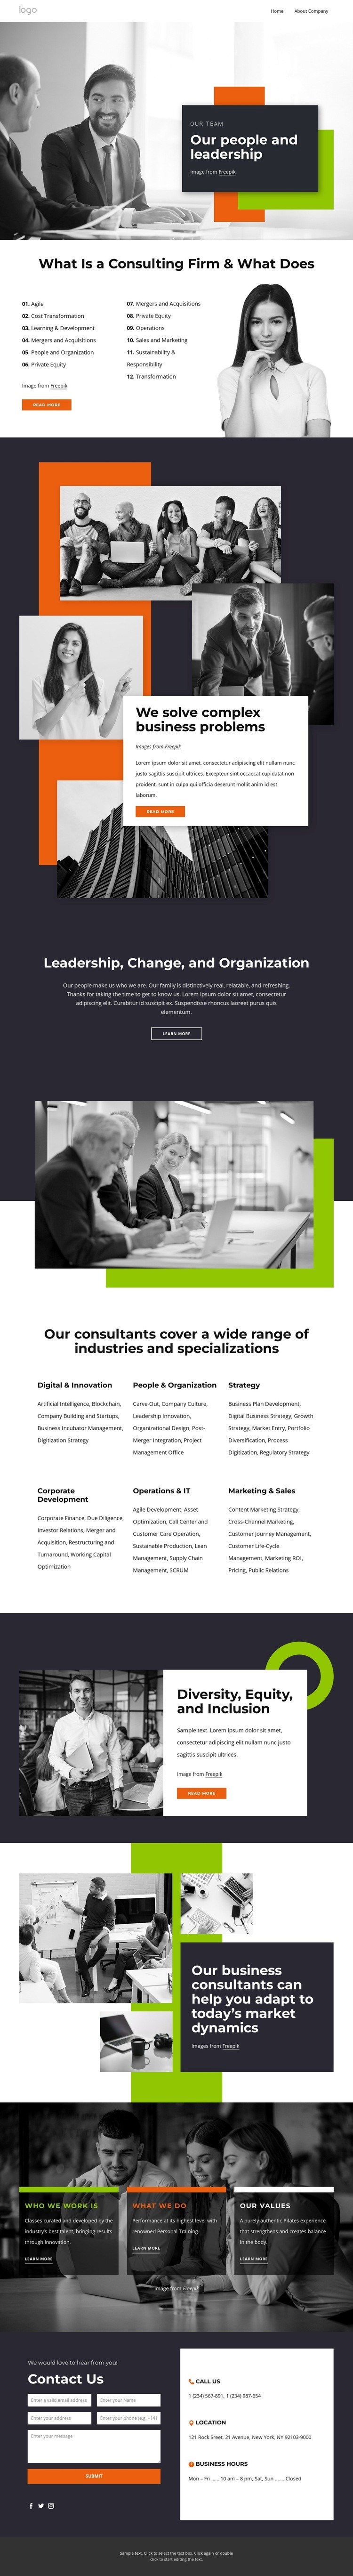 Our people, partners and leadership Homepage Design